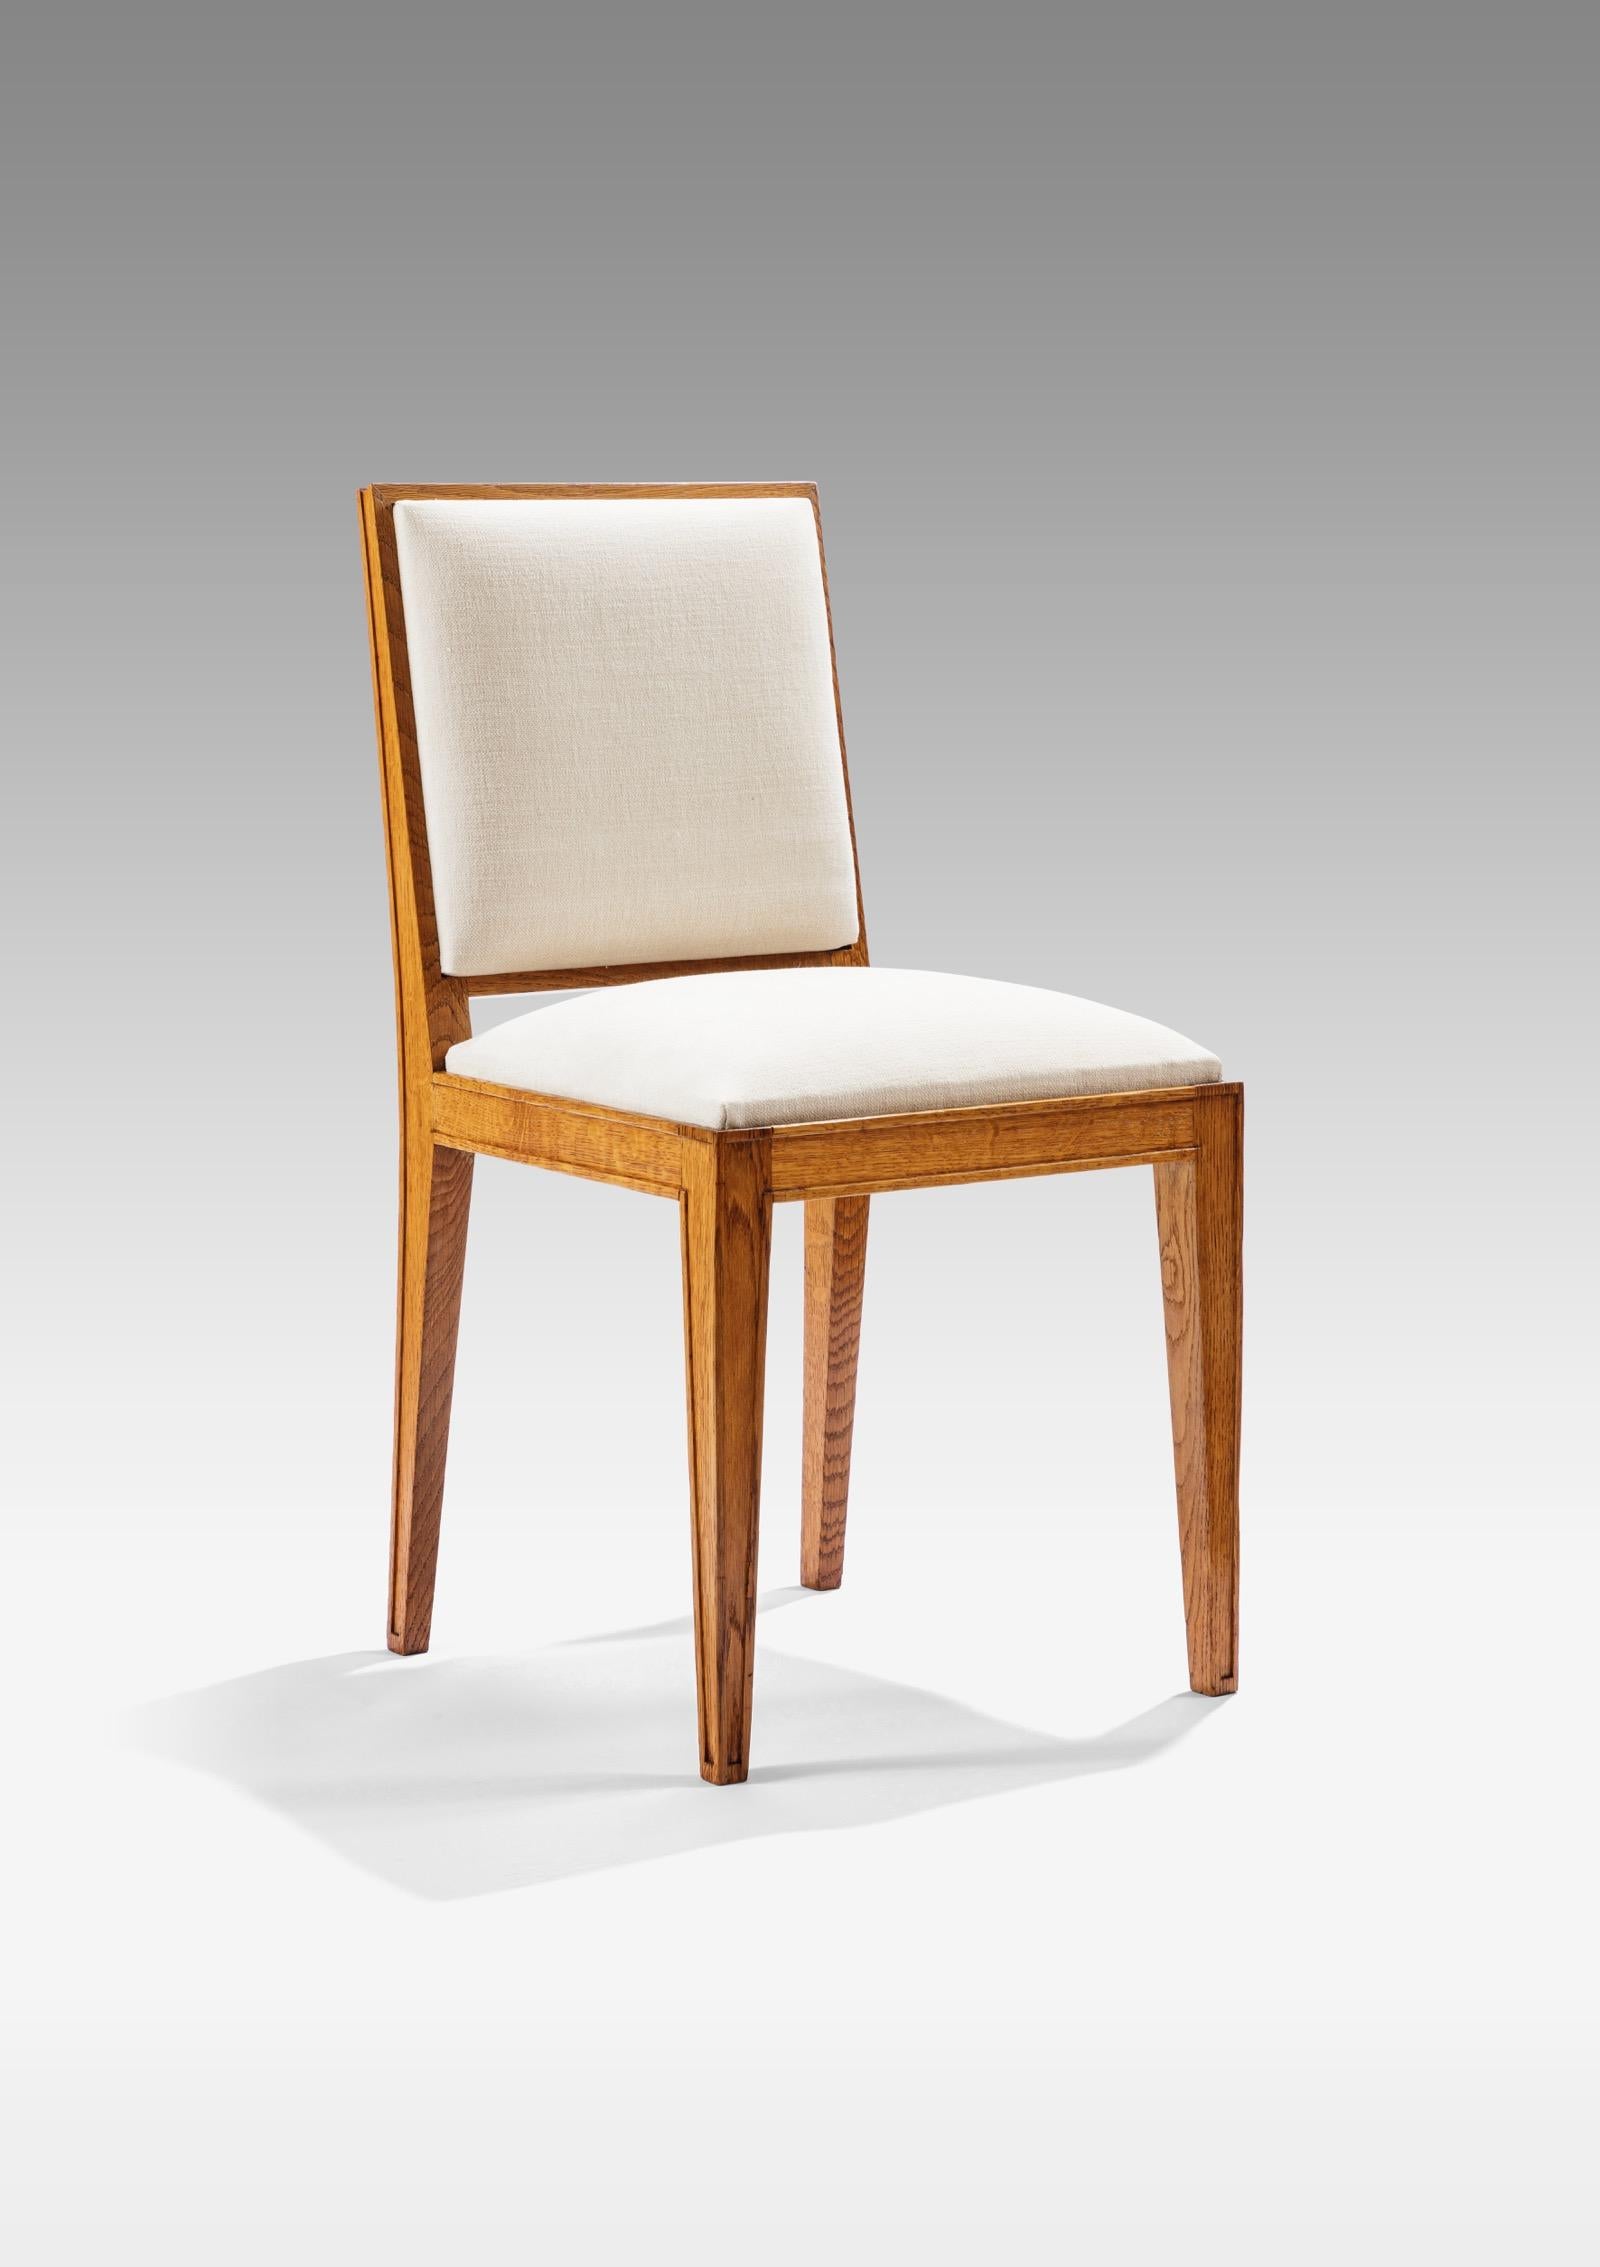 Set of six oak chairs with slightly inclined backs and tapered legs, back and seats covered with cream fabric.